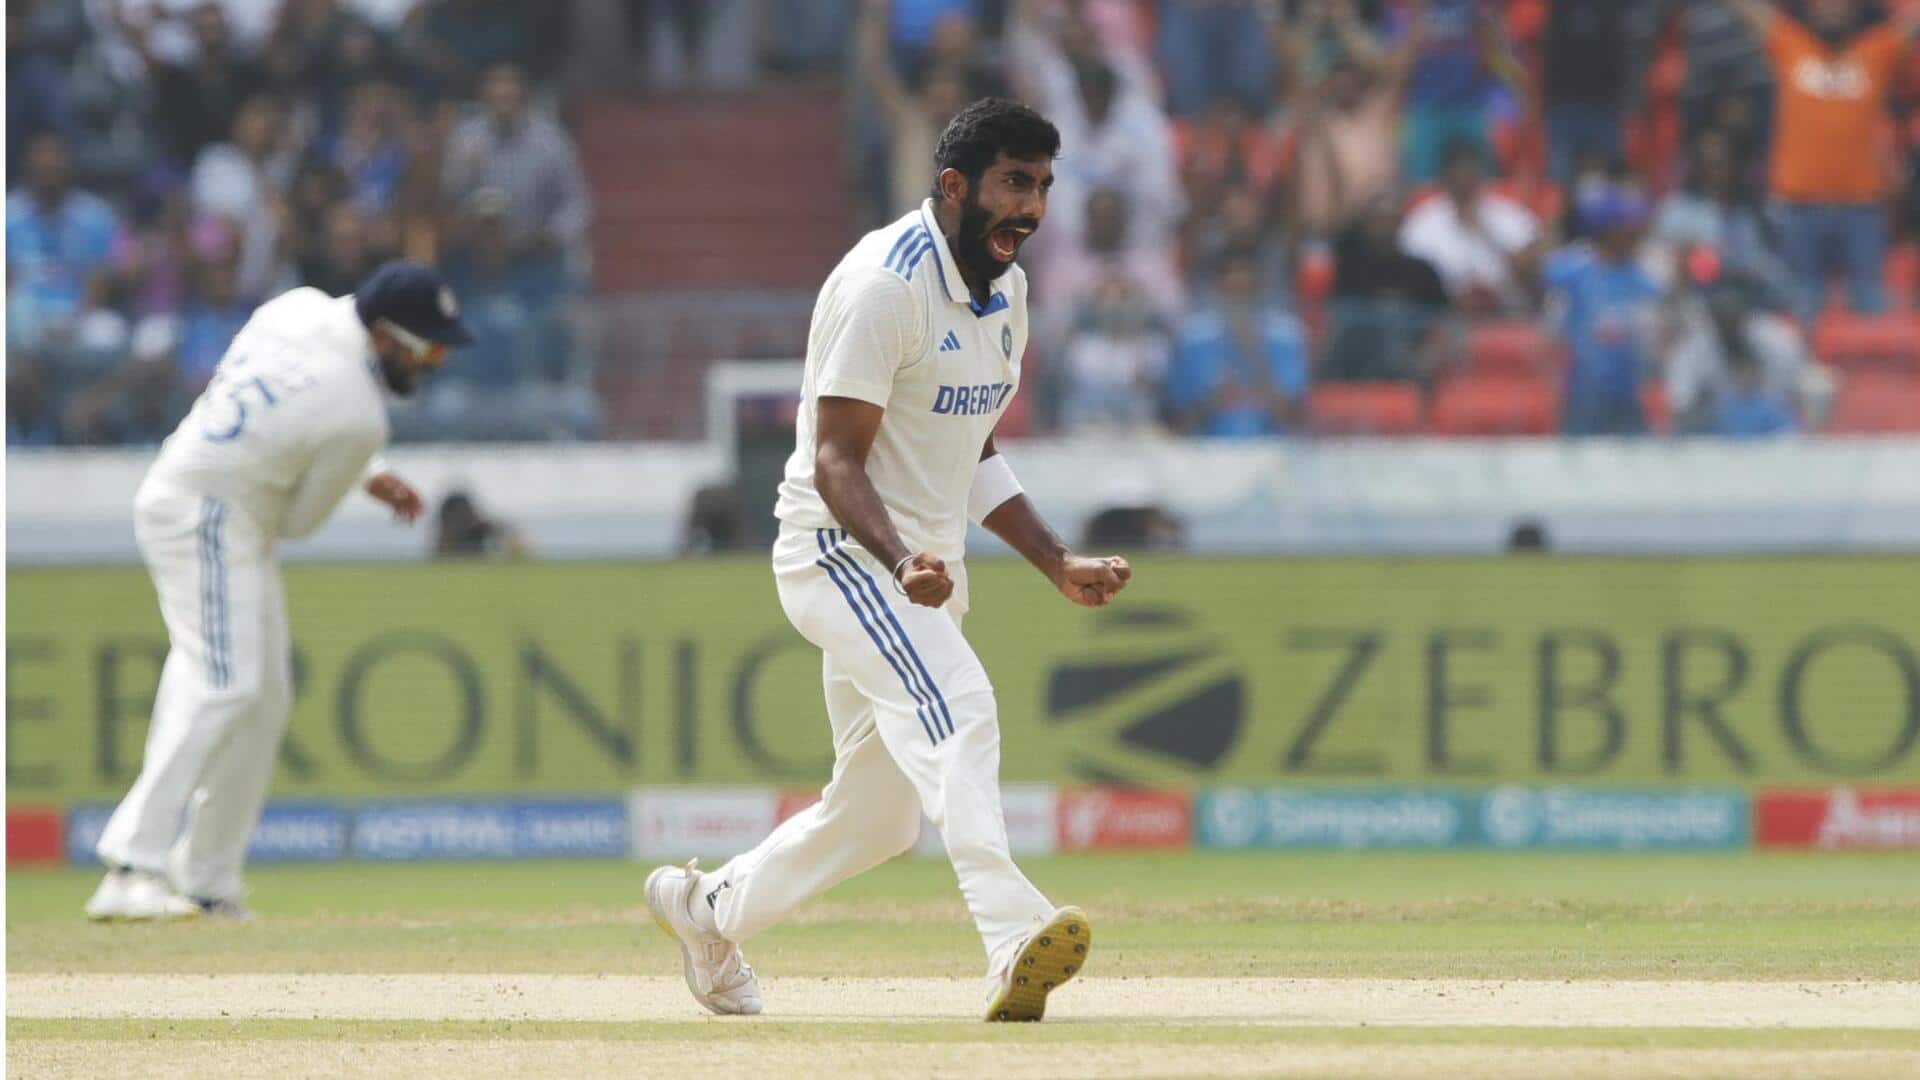 1st Test: Jasprit Bumrah takes six wickets on spin-friendly wicket